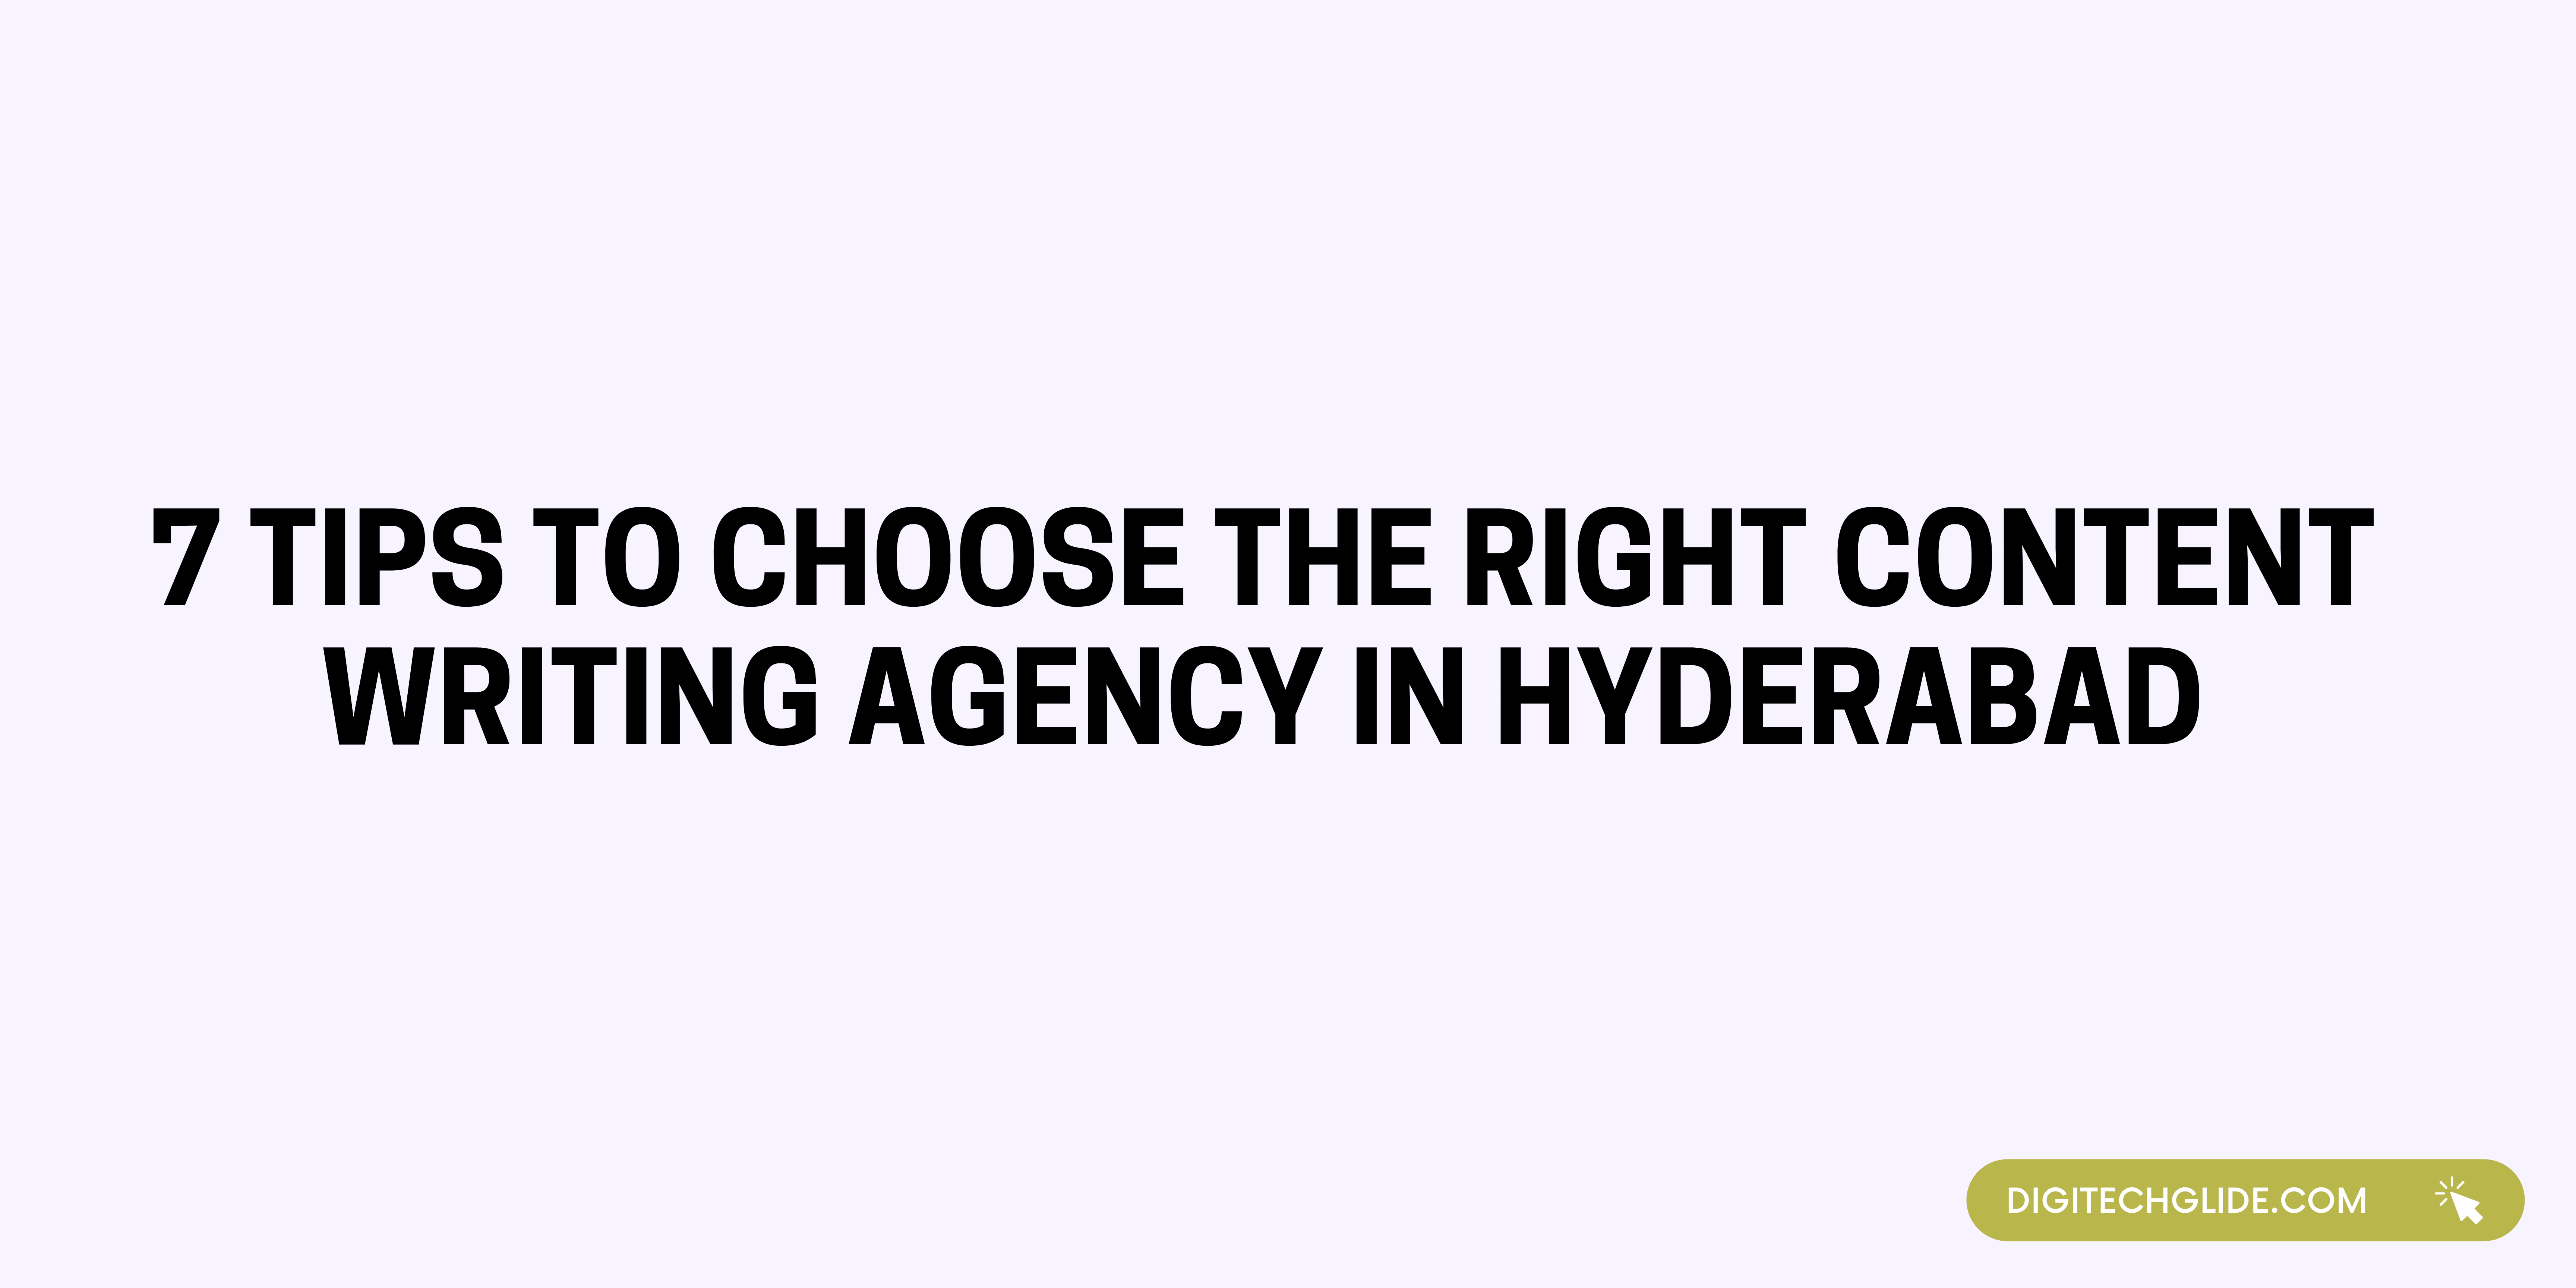 7 Tips To Choose The Right Content Writing Agency In Hyderabad